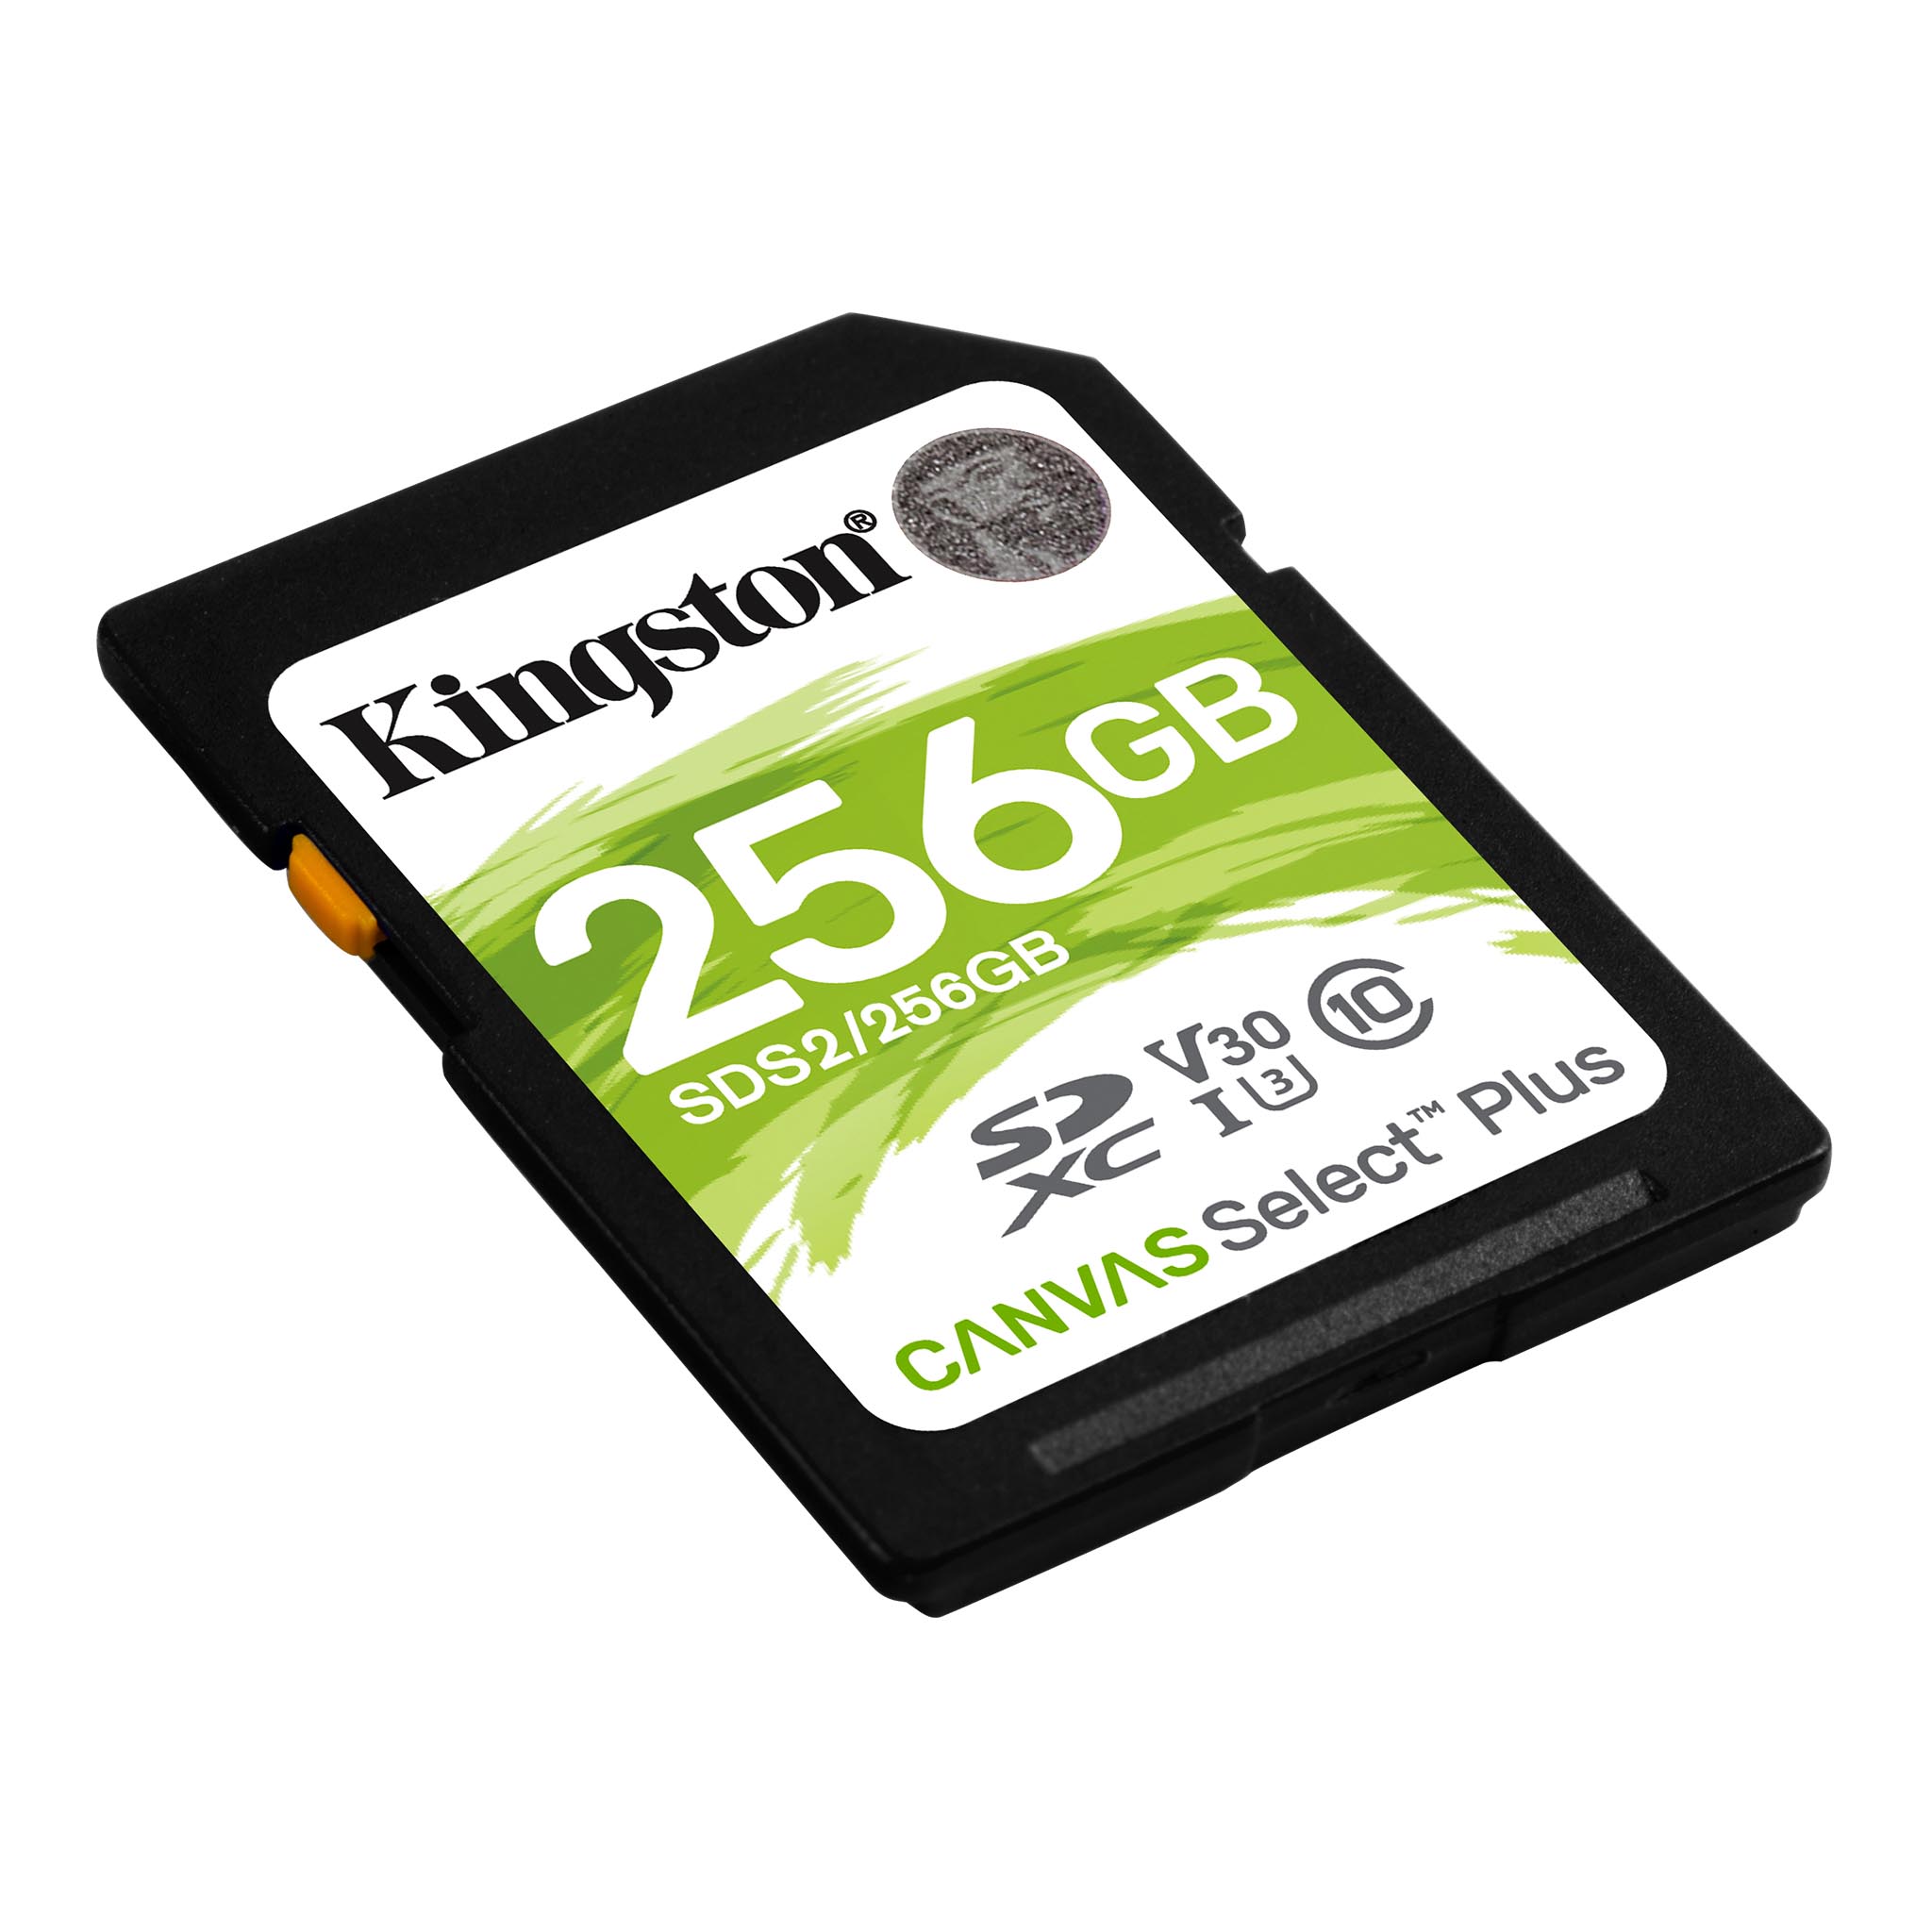 100MBs Works with Kingston Kingston 32GB Meizu M3 MicroSDHC Canvas Select Plus Card Verified by SanFlash. 